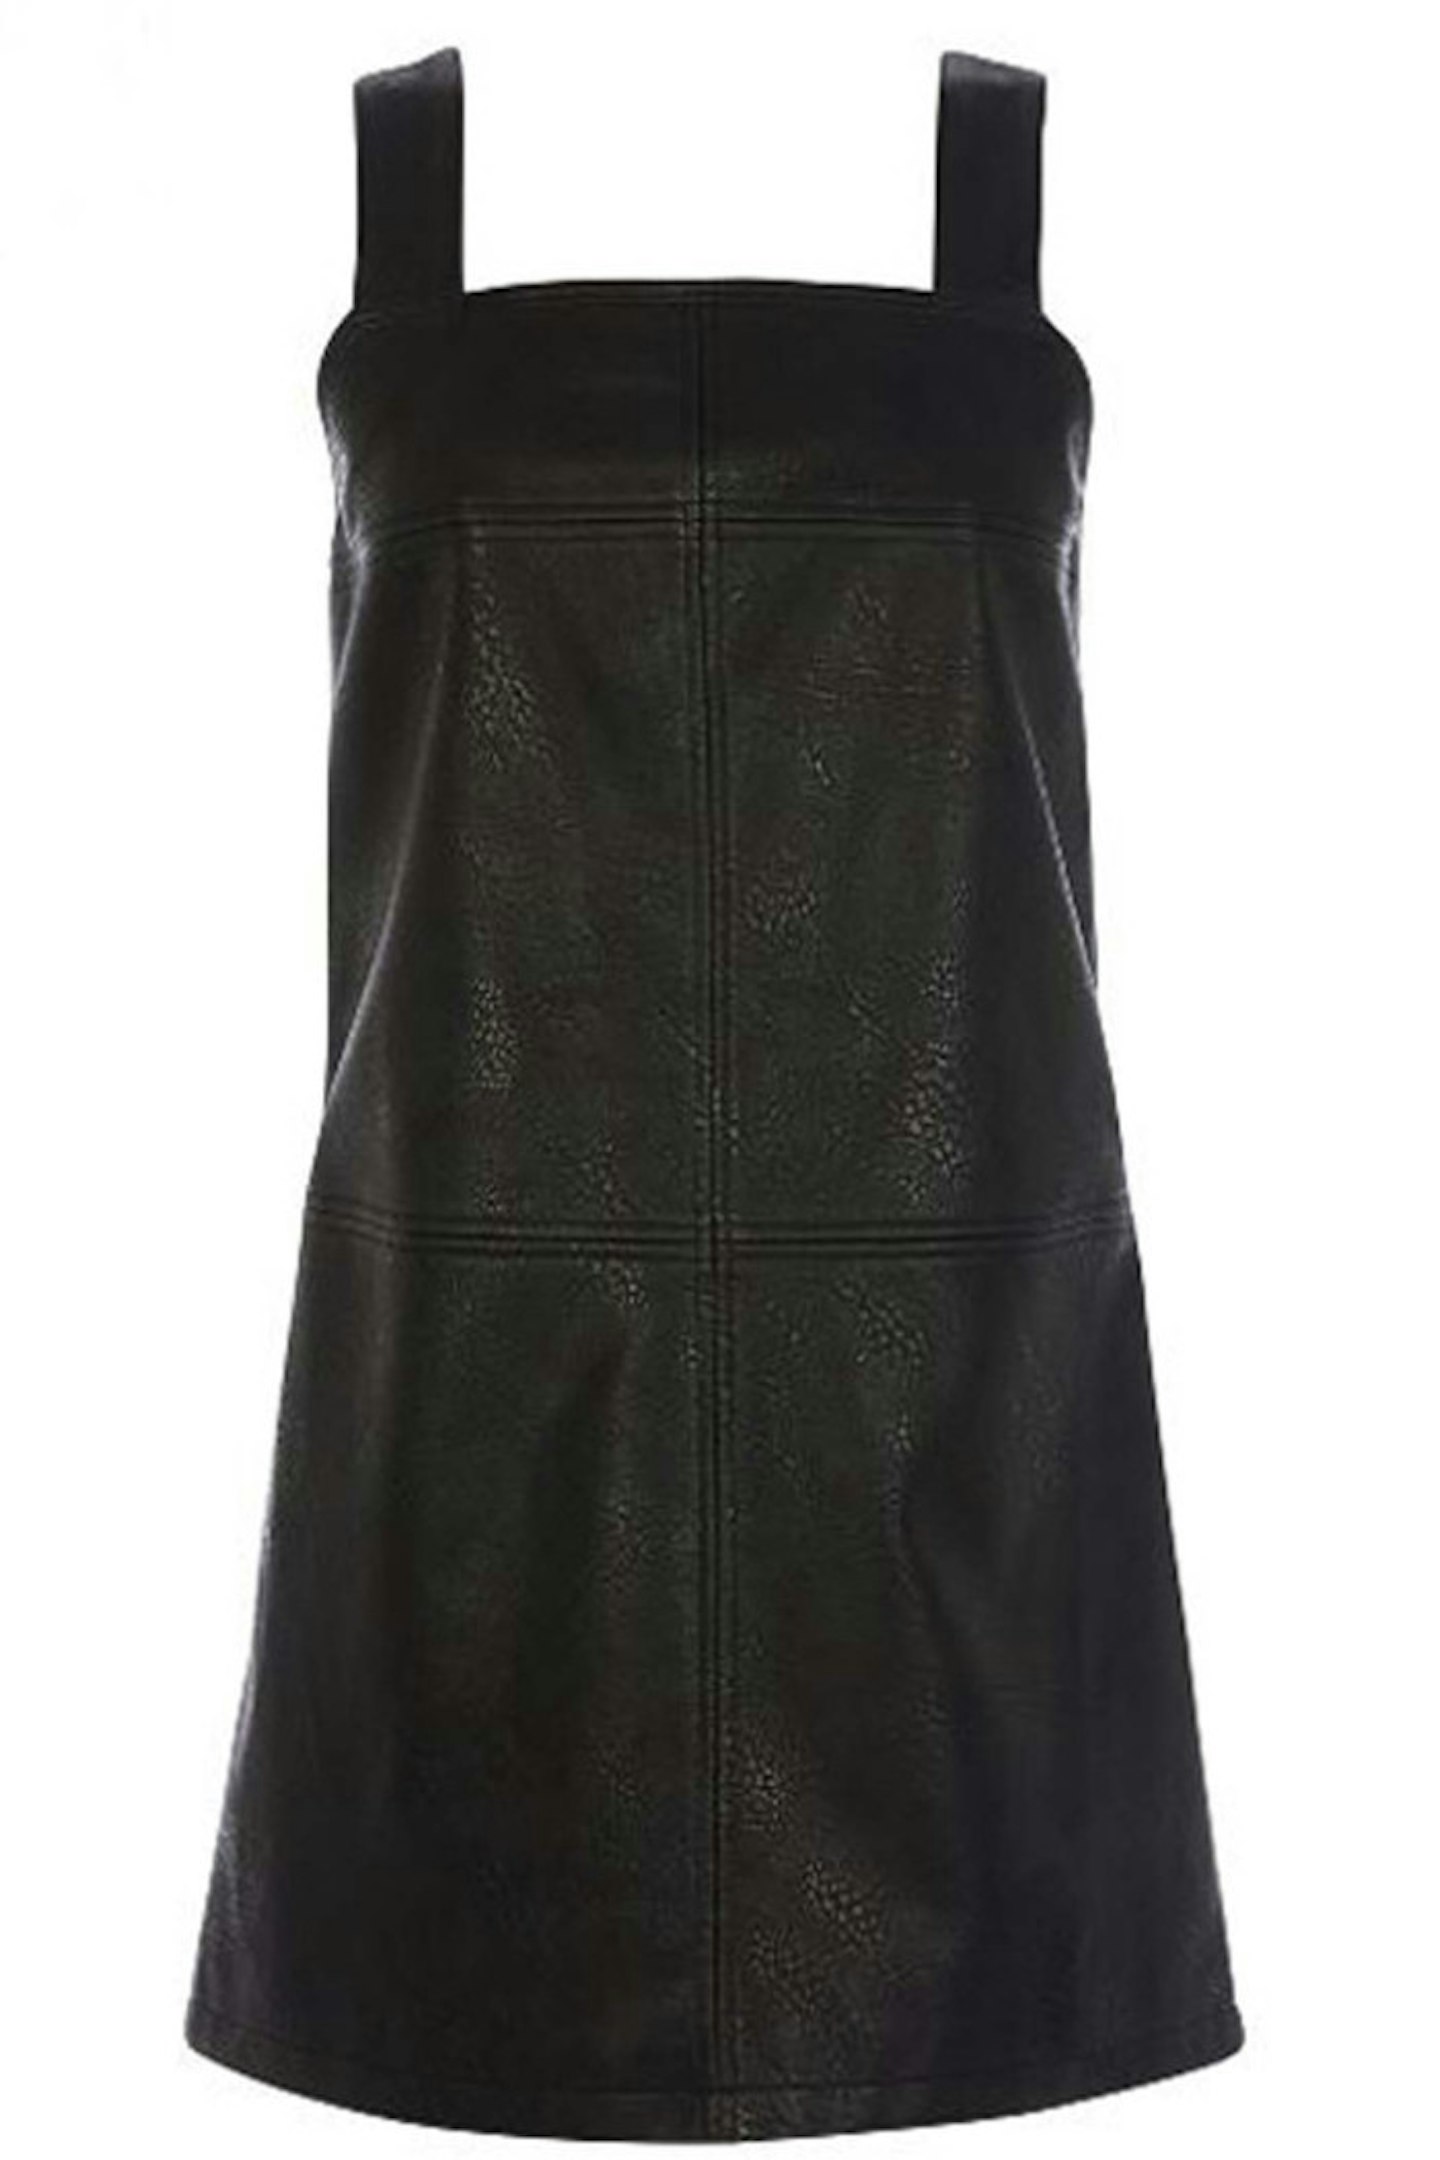 12. Faux Leather Dungaree Dress, £48, Warehouse